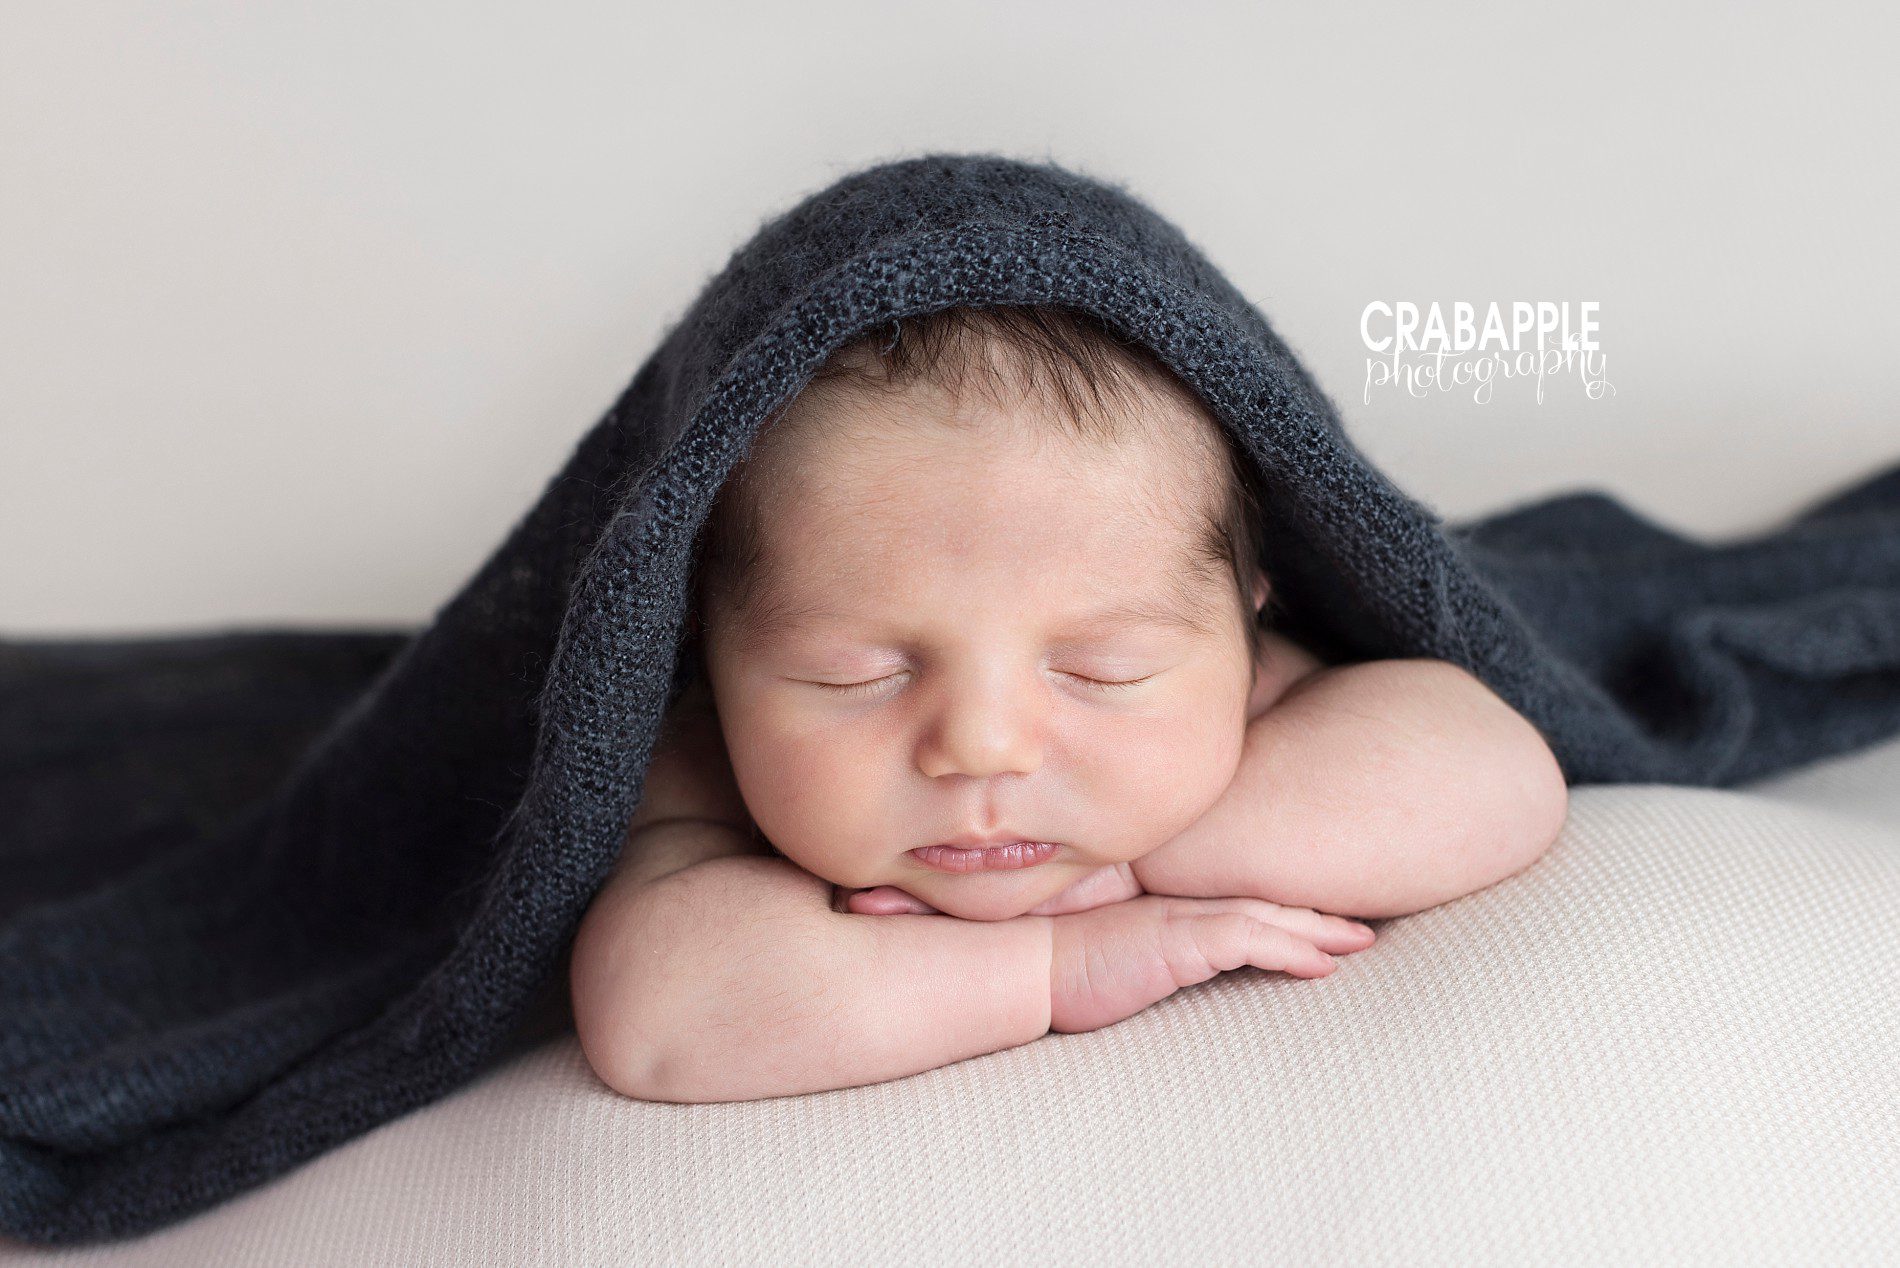 sweet and adorable ideas for newborn poses using blankets